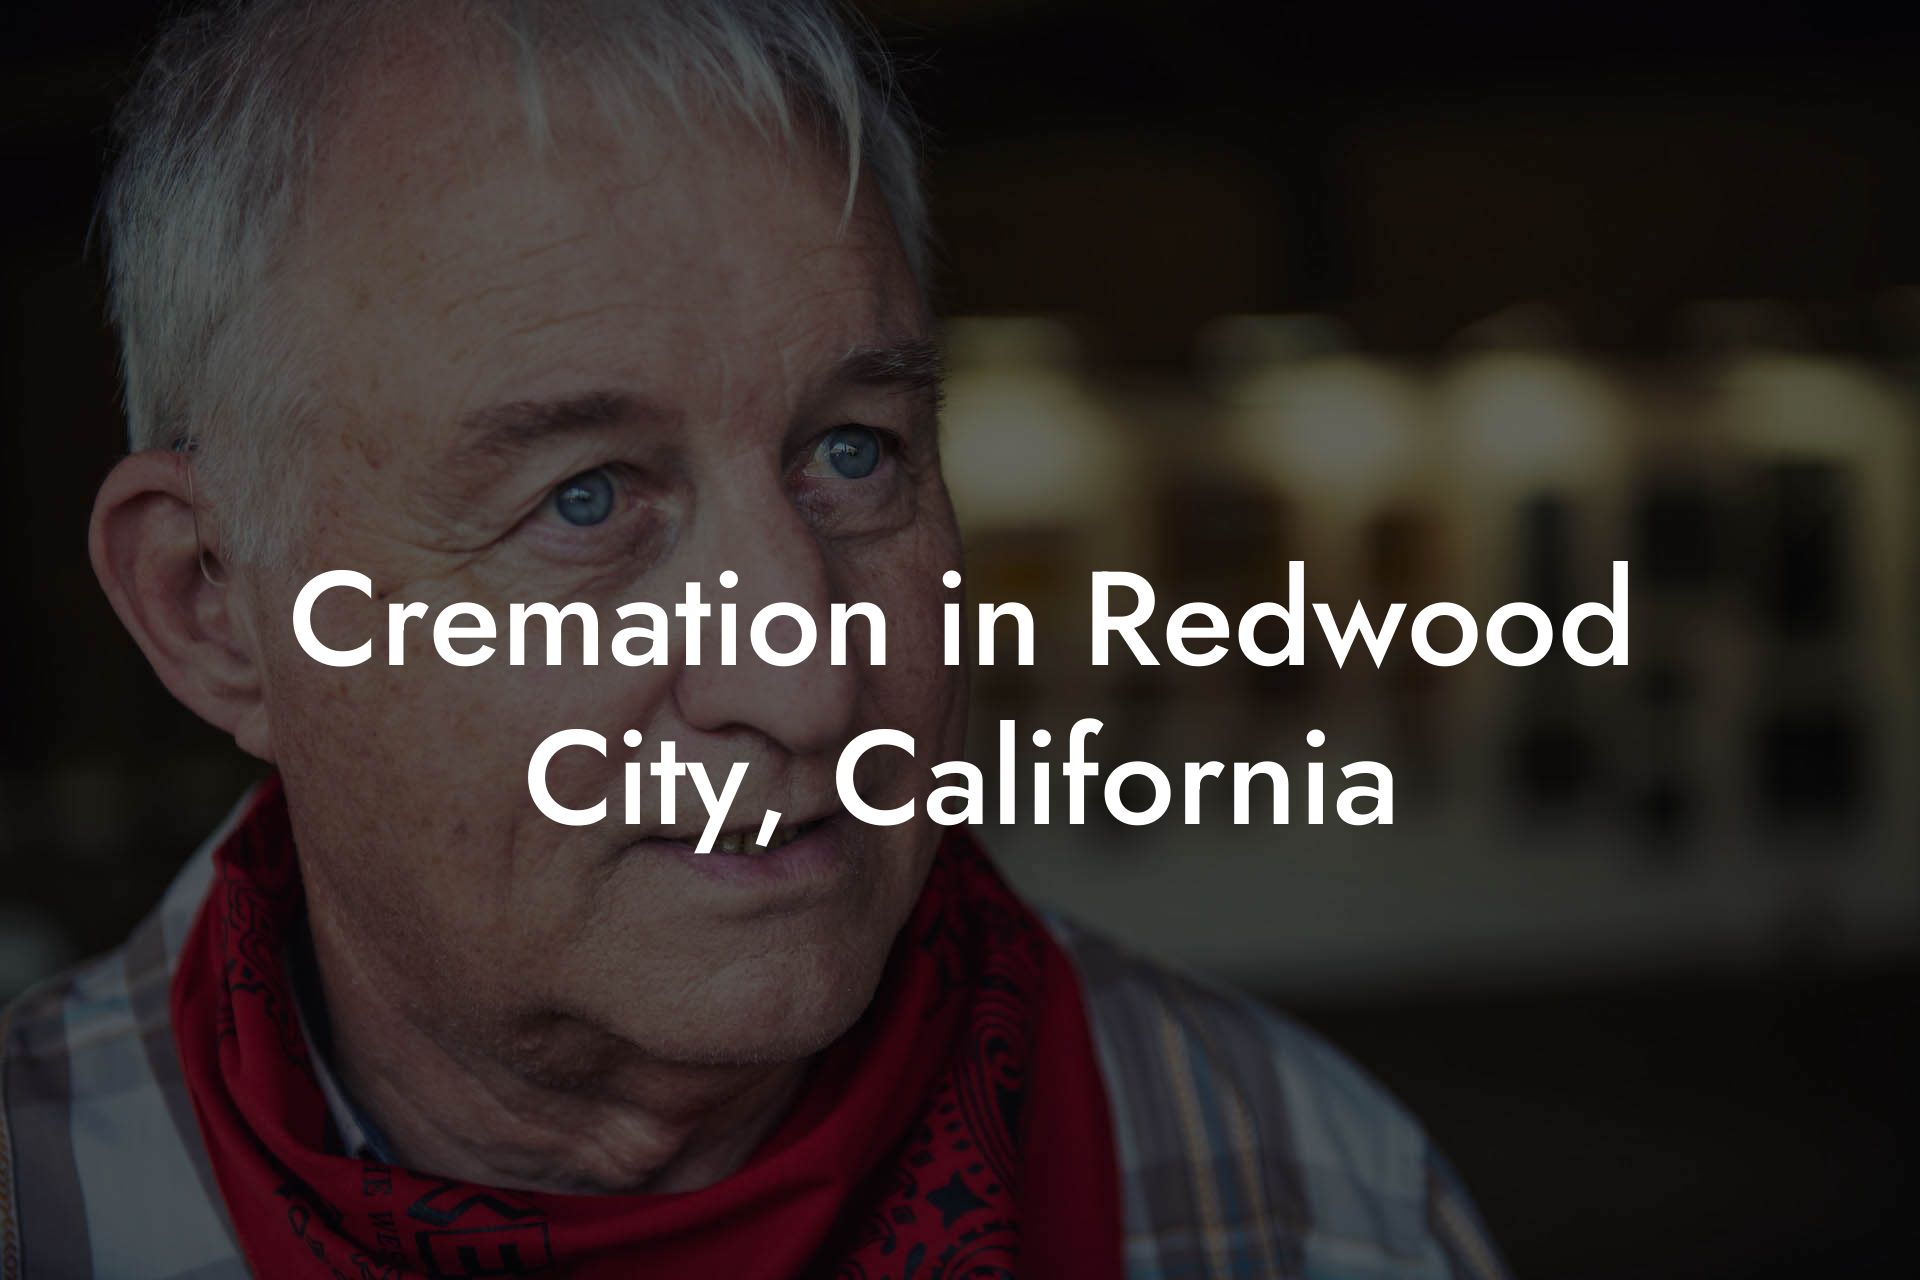 Cremation in Redwood City, California